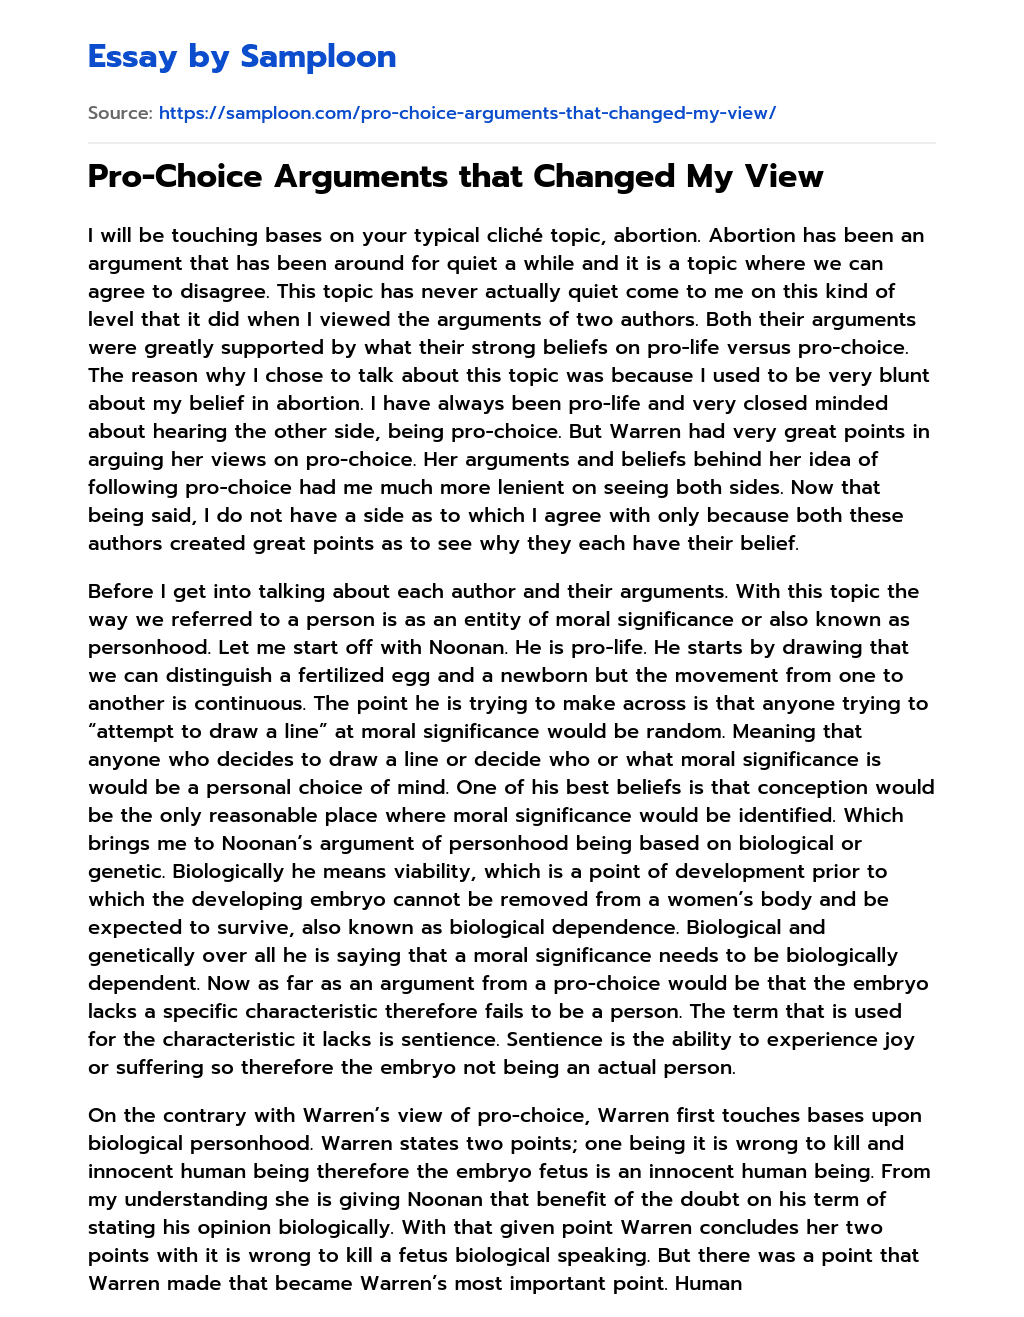 Pro-Choice Arguments that Changed My View essay